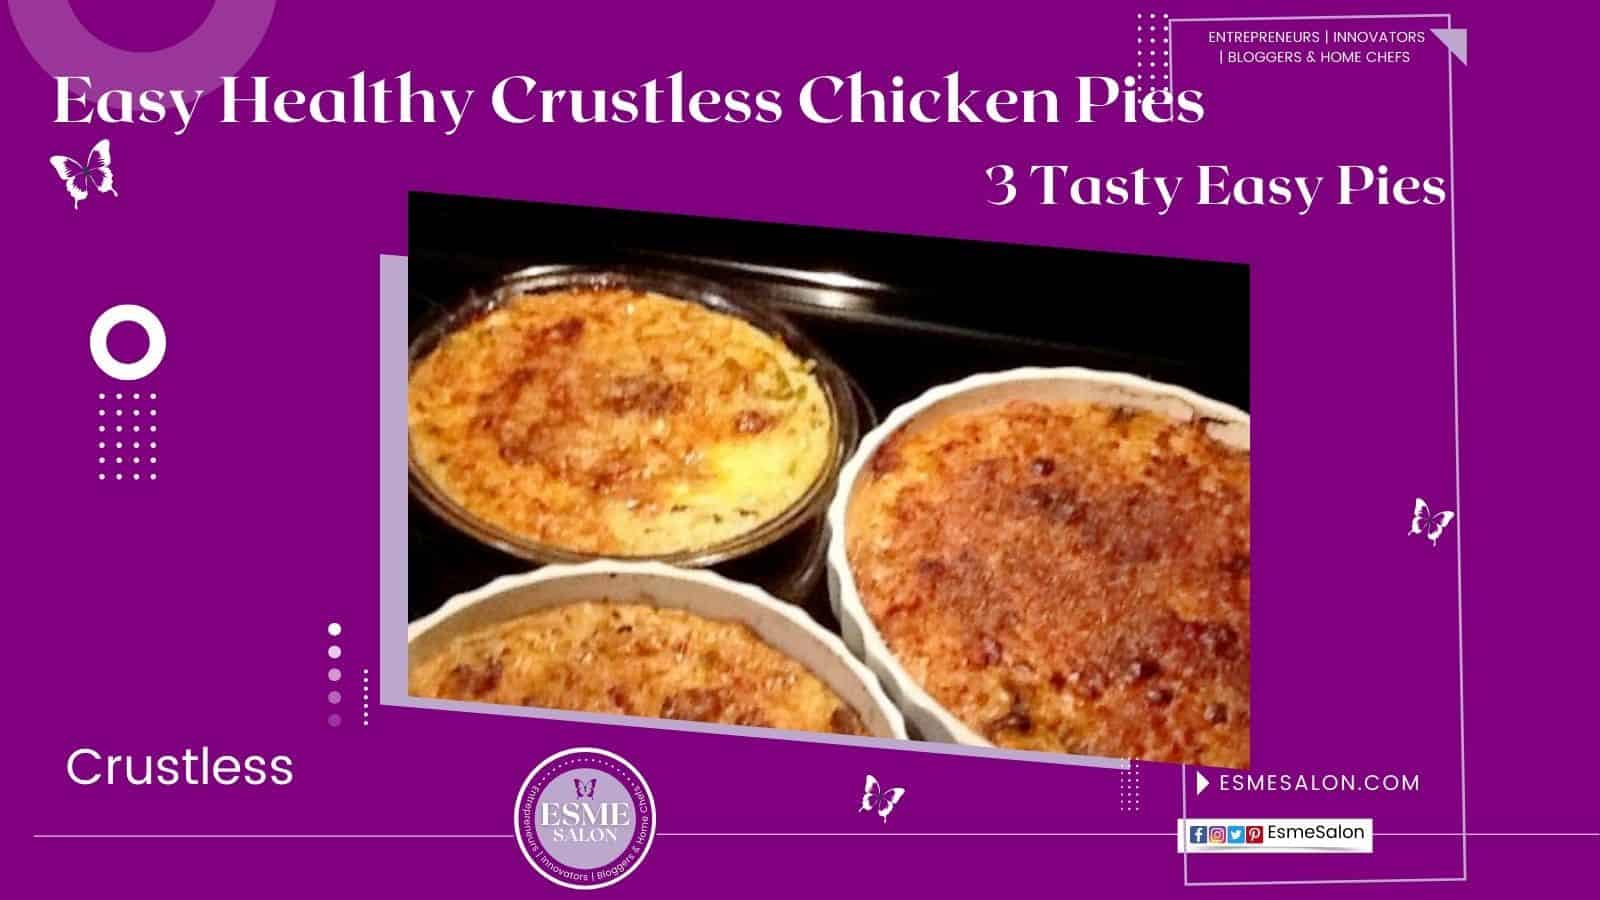 Easy Healthy Crustless Chicken Pies from one mixture